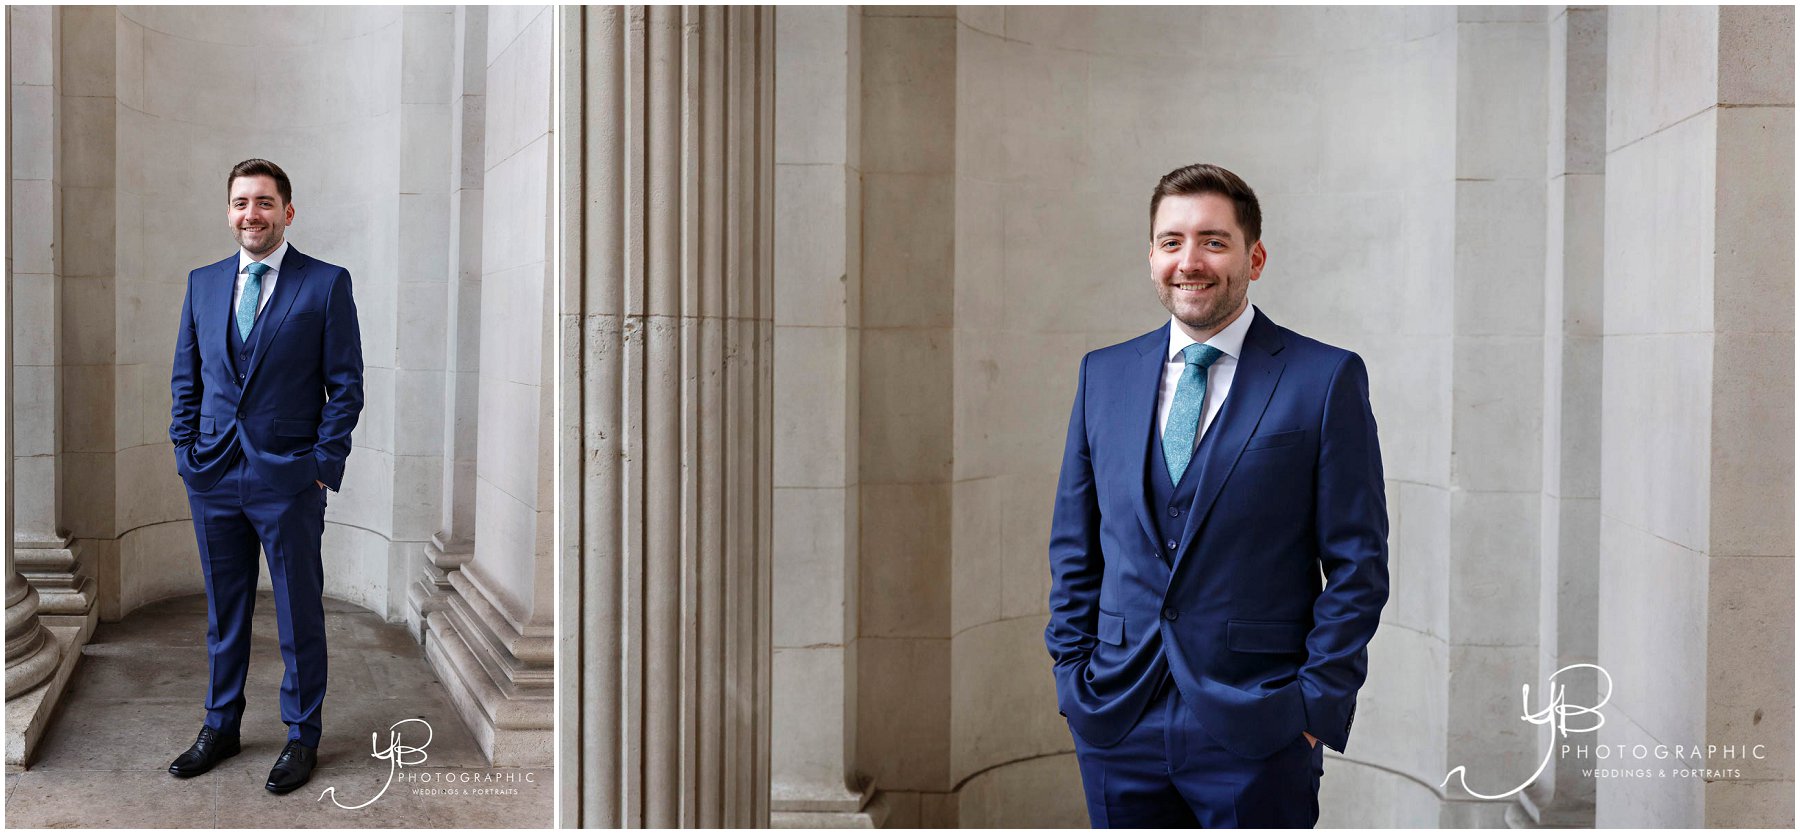 Groom portraits at The Old Marylebone Town Hall by YBPHOTOGRAPHIC